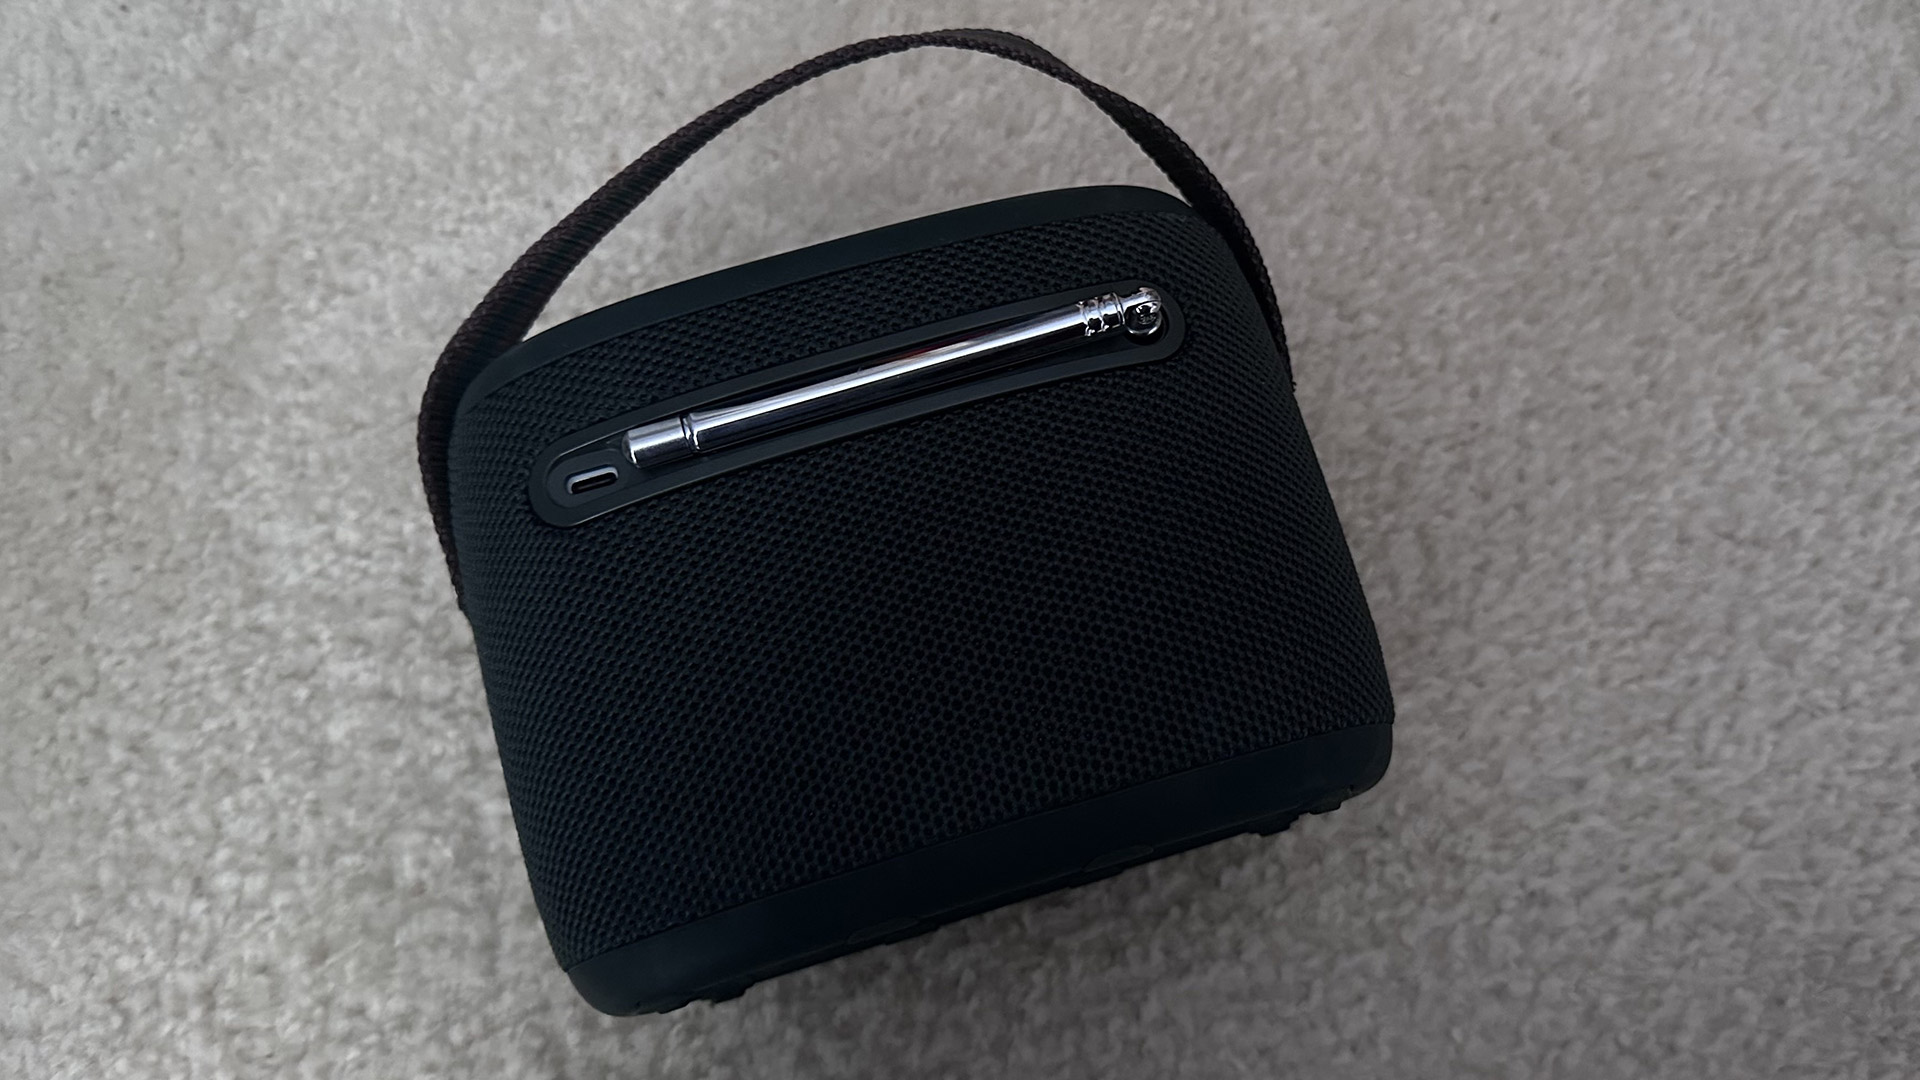 The Pure Woodland Bluetooth speaker with DAB radio facing down